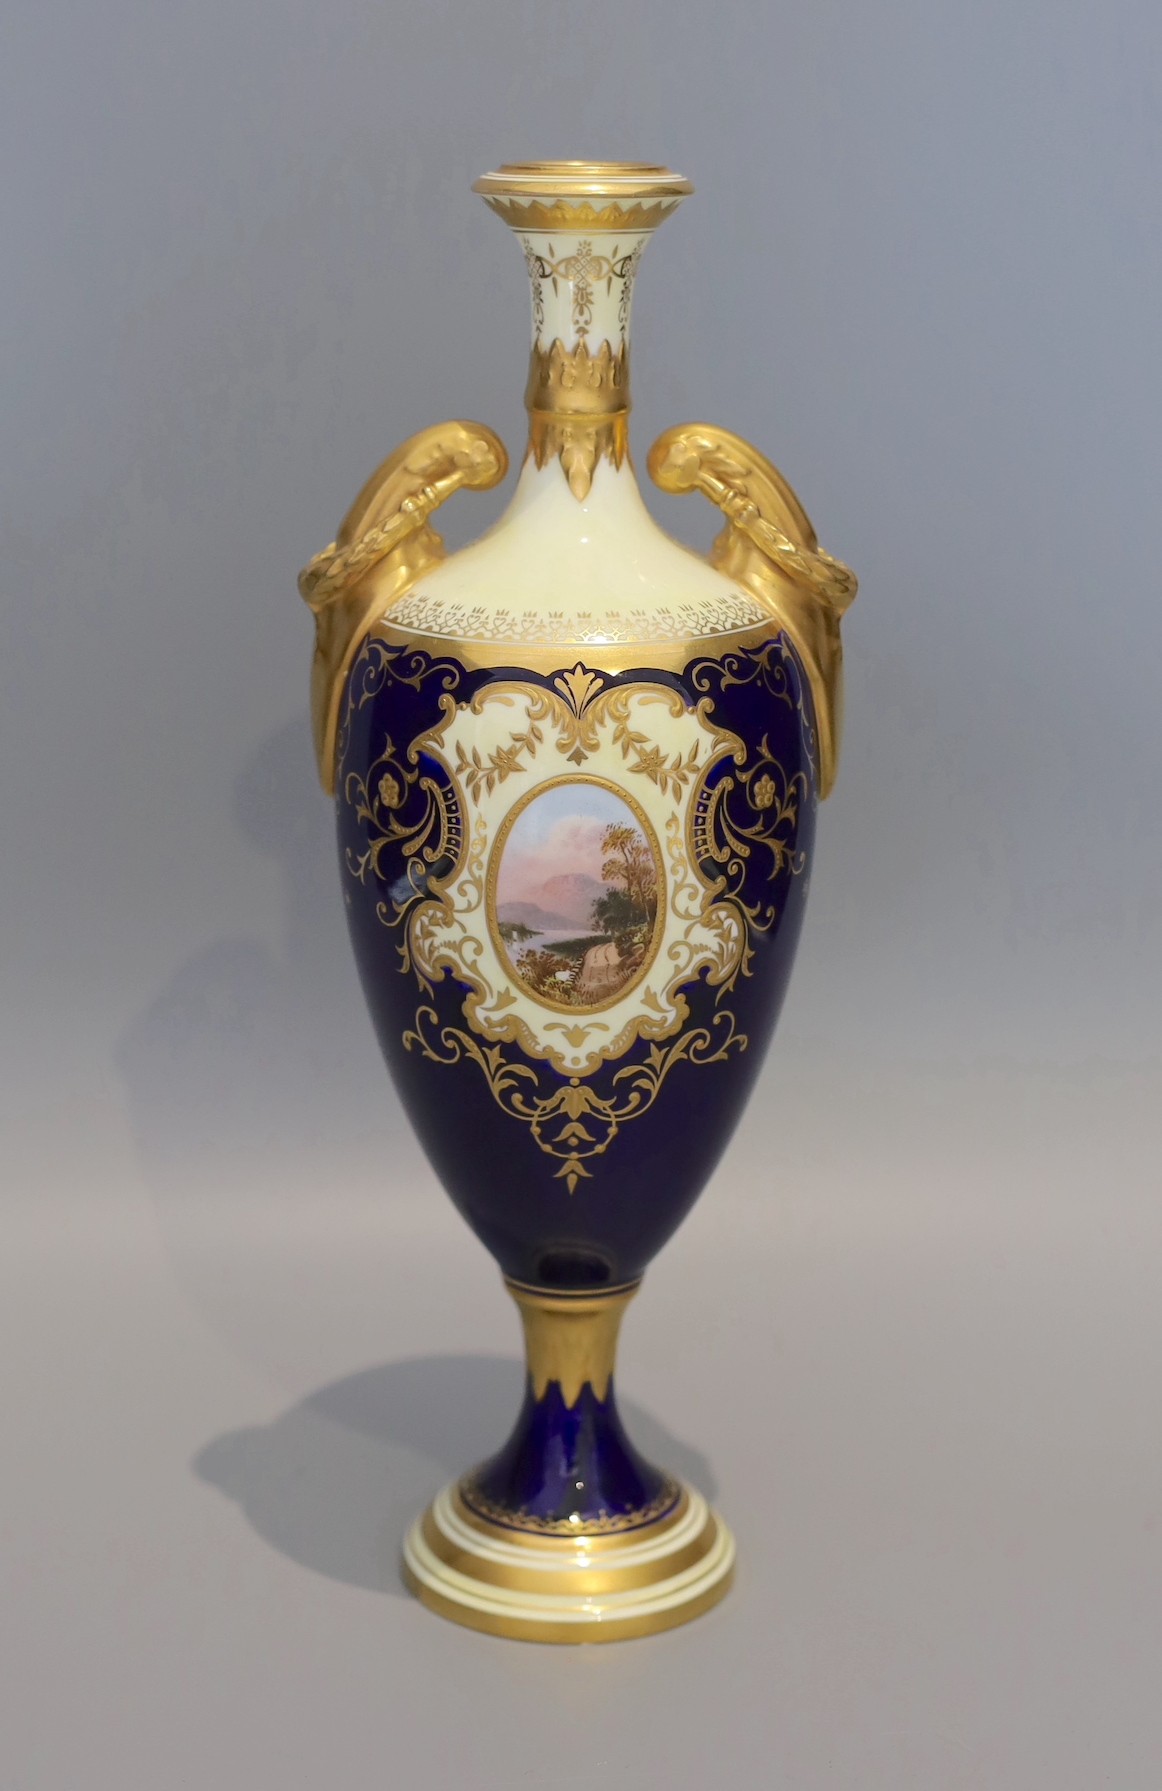 An early 20th century Coalport porcelain vase painted with a view of lake Windermere on a cobalt blue and ivory ground, height 29 cms.